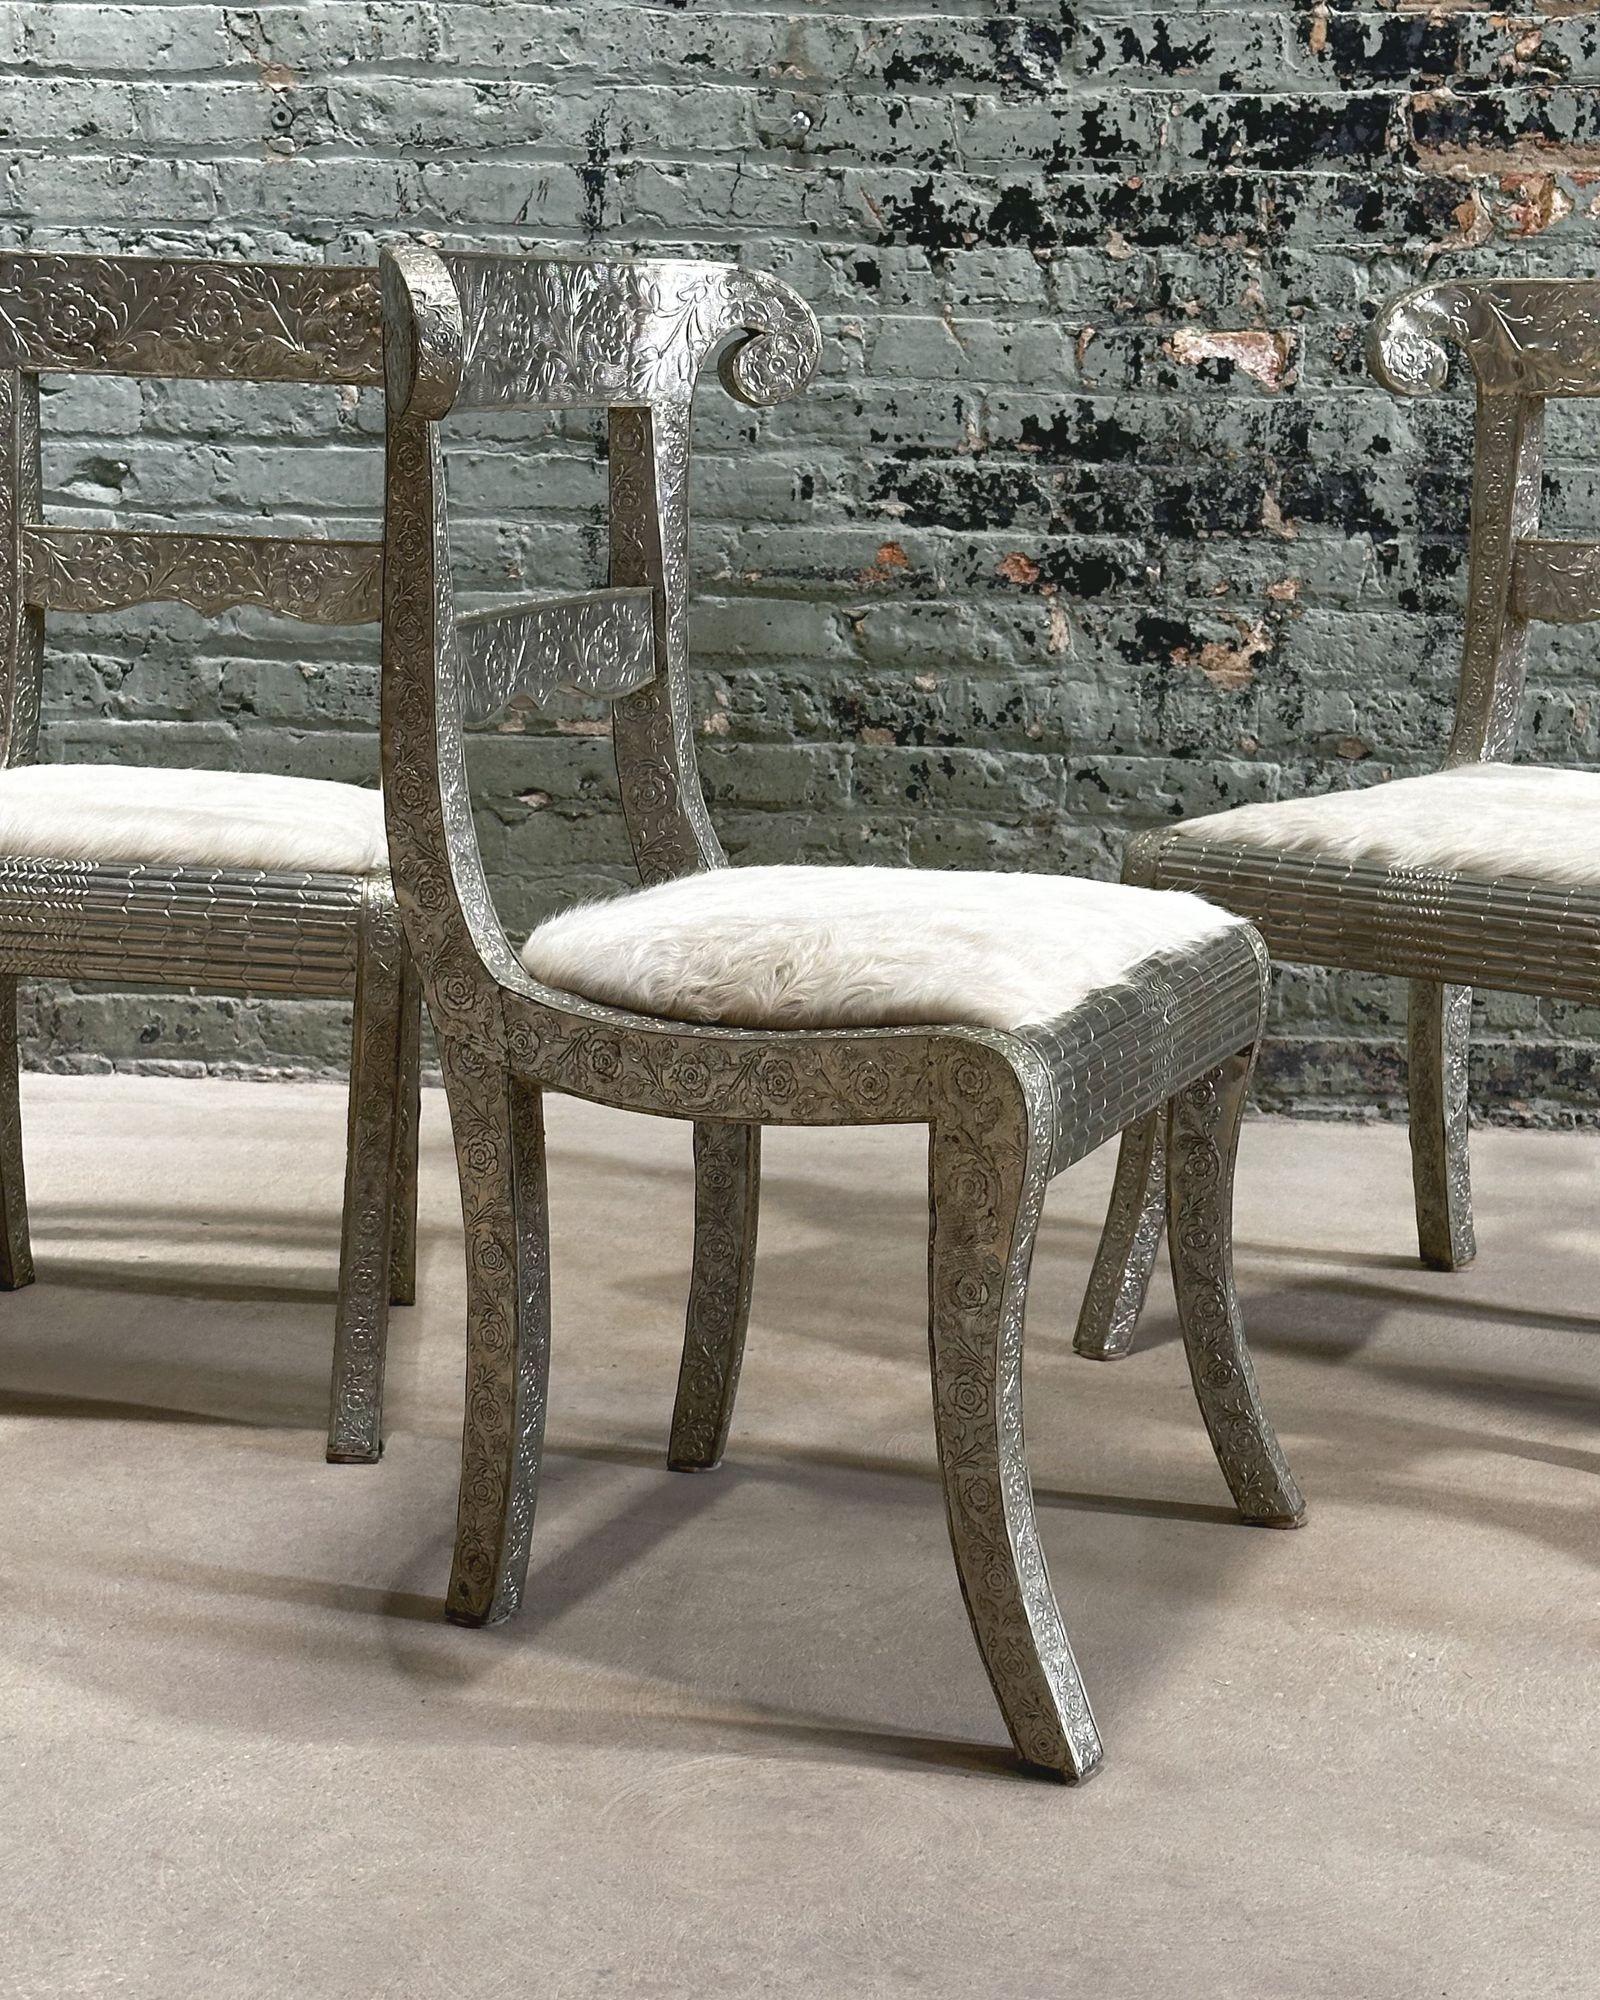 Silver Leaf Anglo Raj Style-Indian Hammered Silver Wrap Dining Chairs w/Hair on Hide, 1950 For Sale